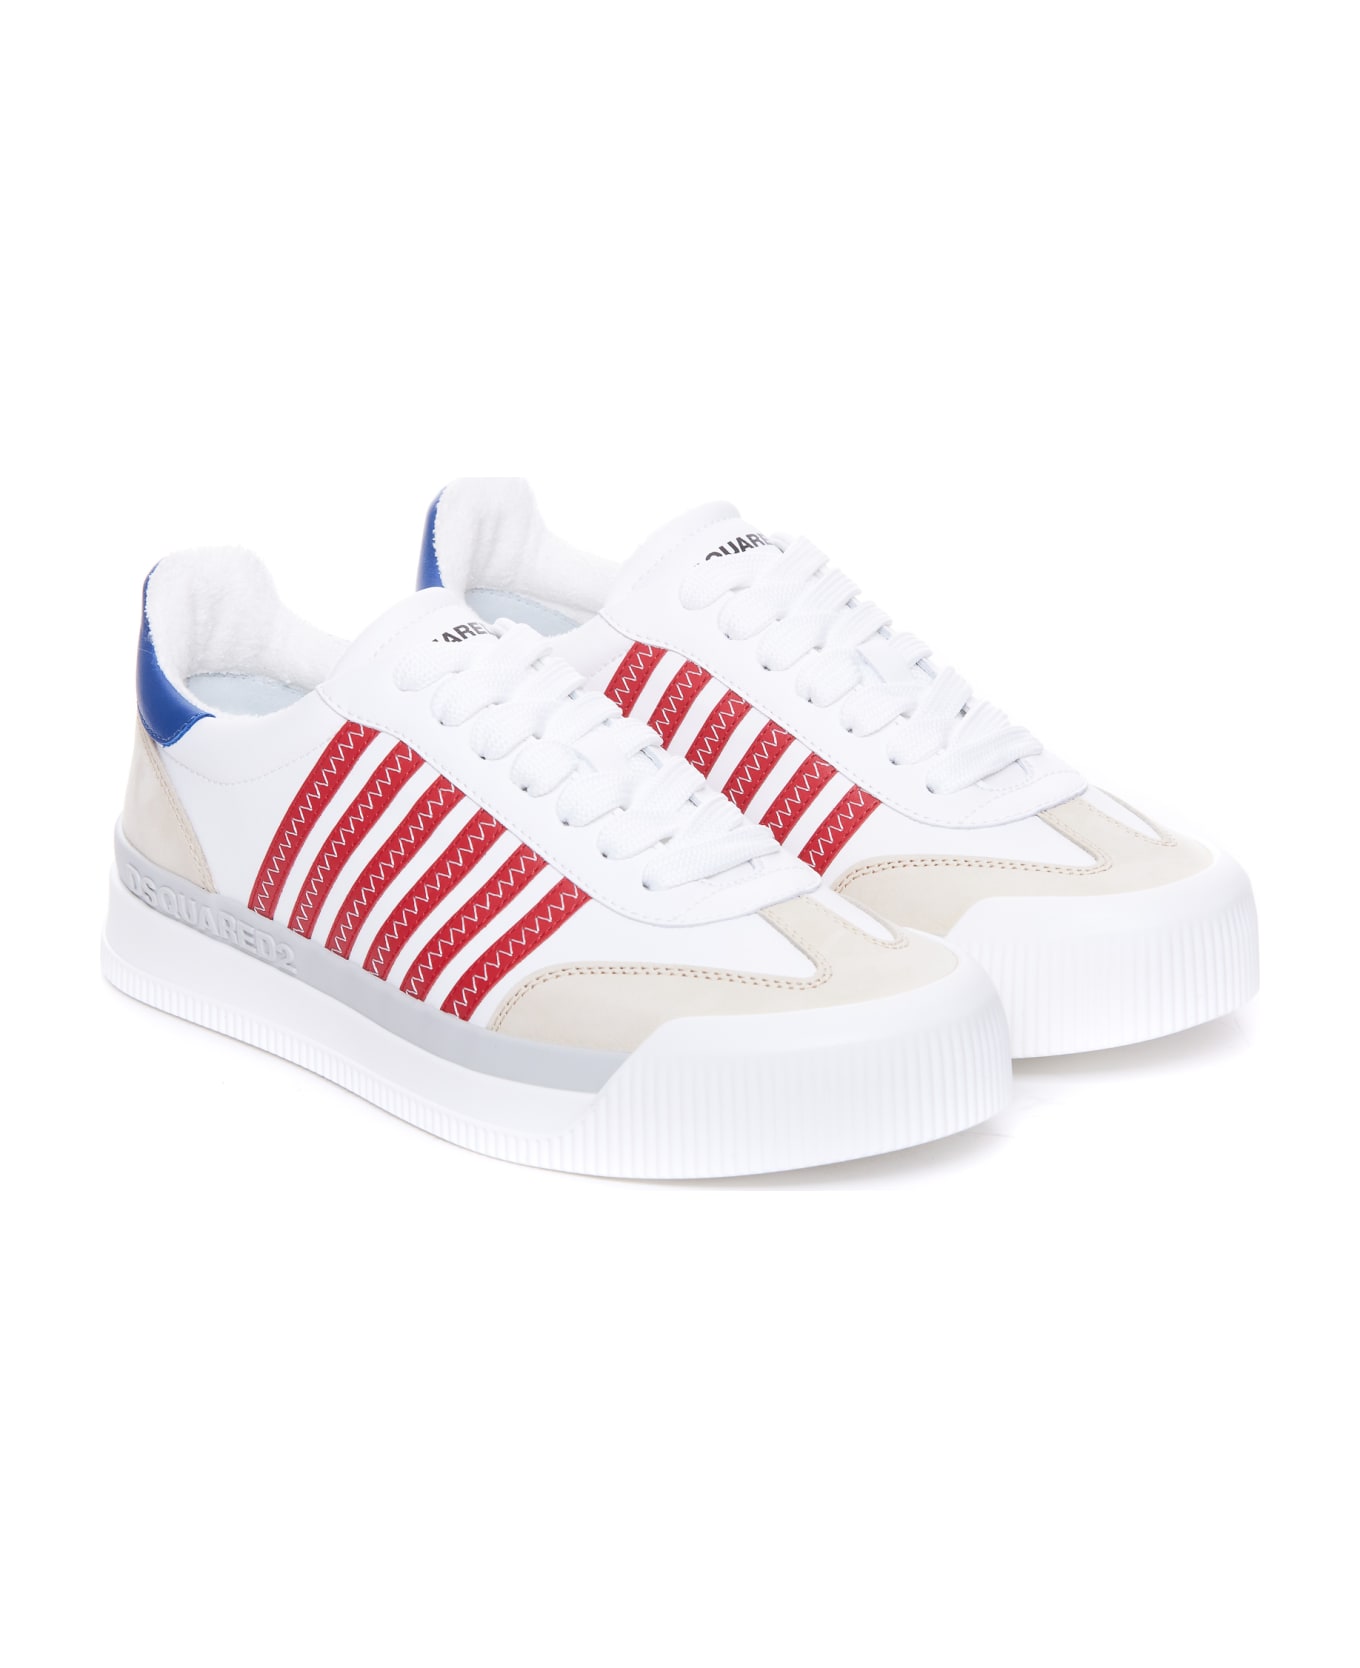 Dsquared2 New Jersey Sneakers - Bianco Rosso Blu スニーカー